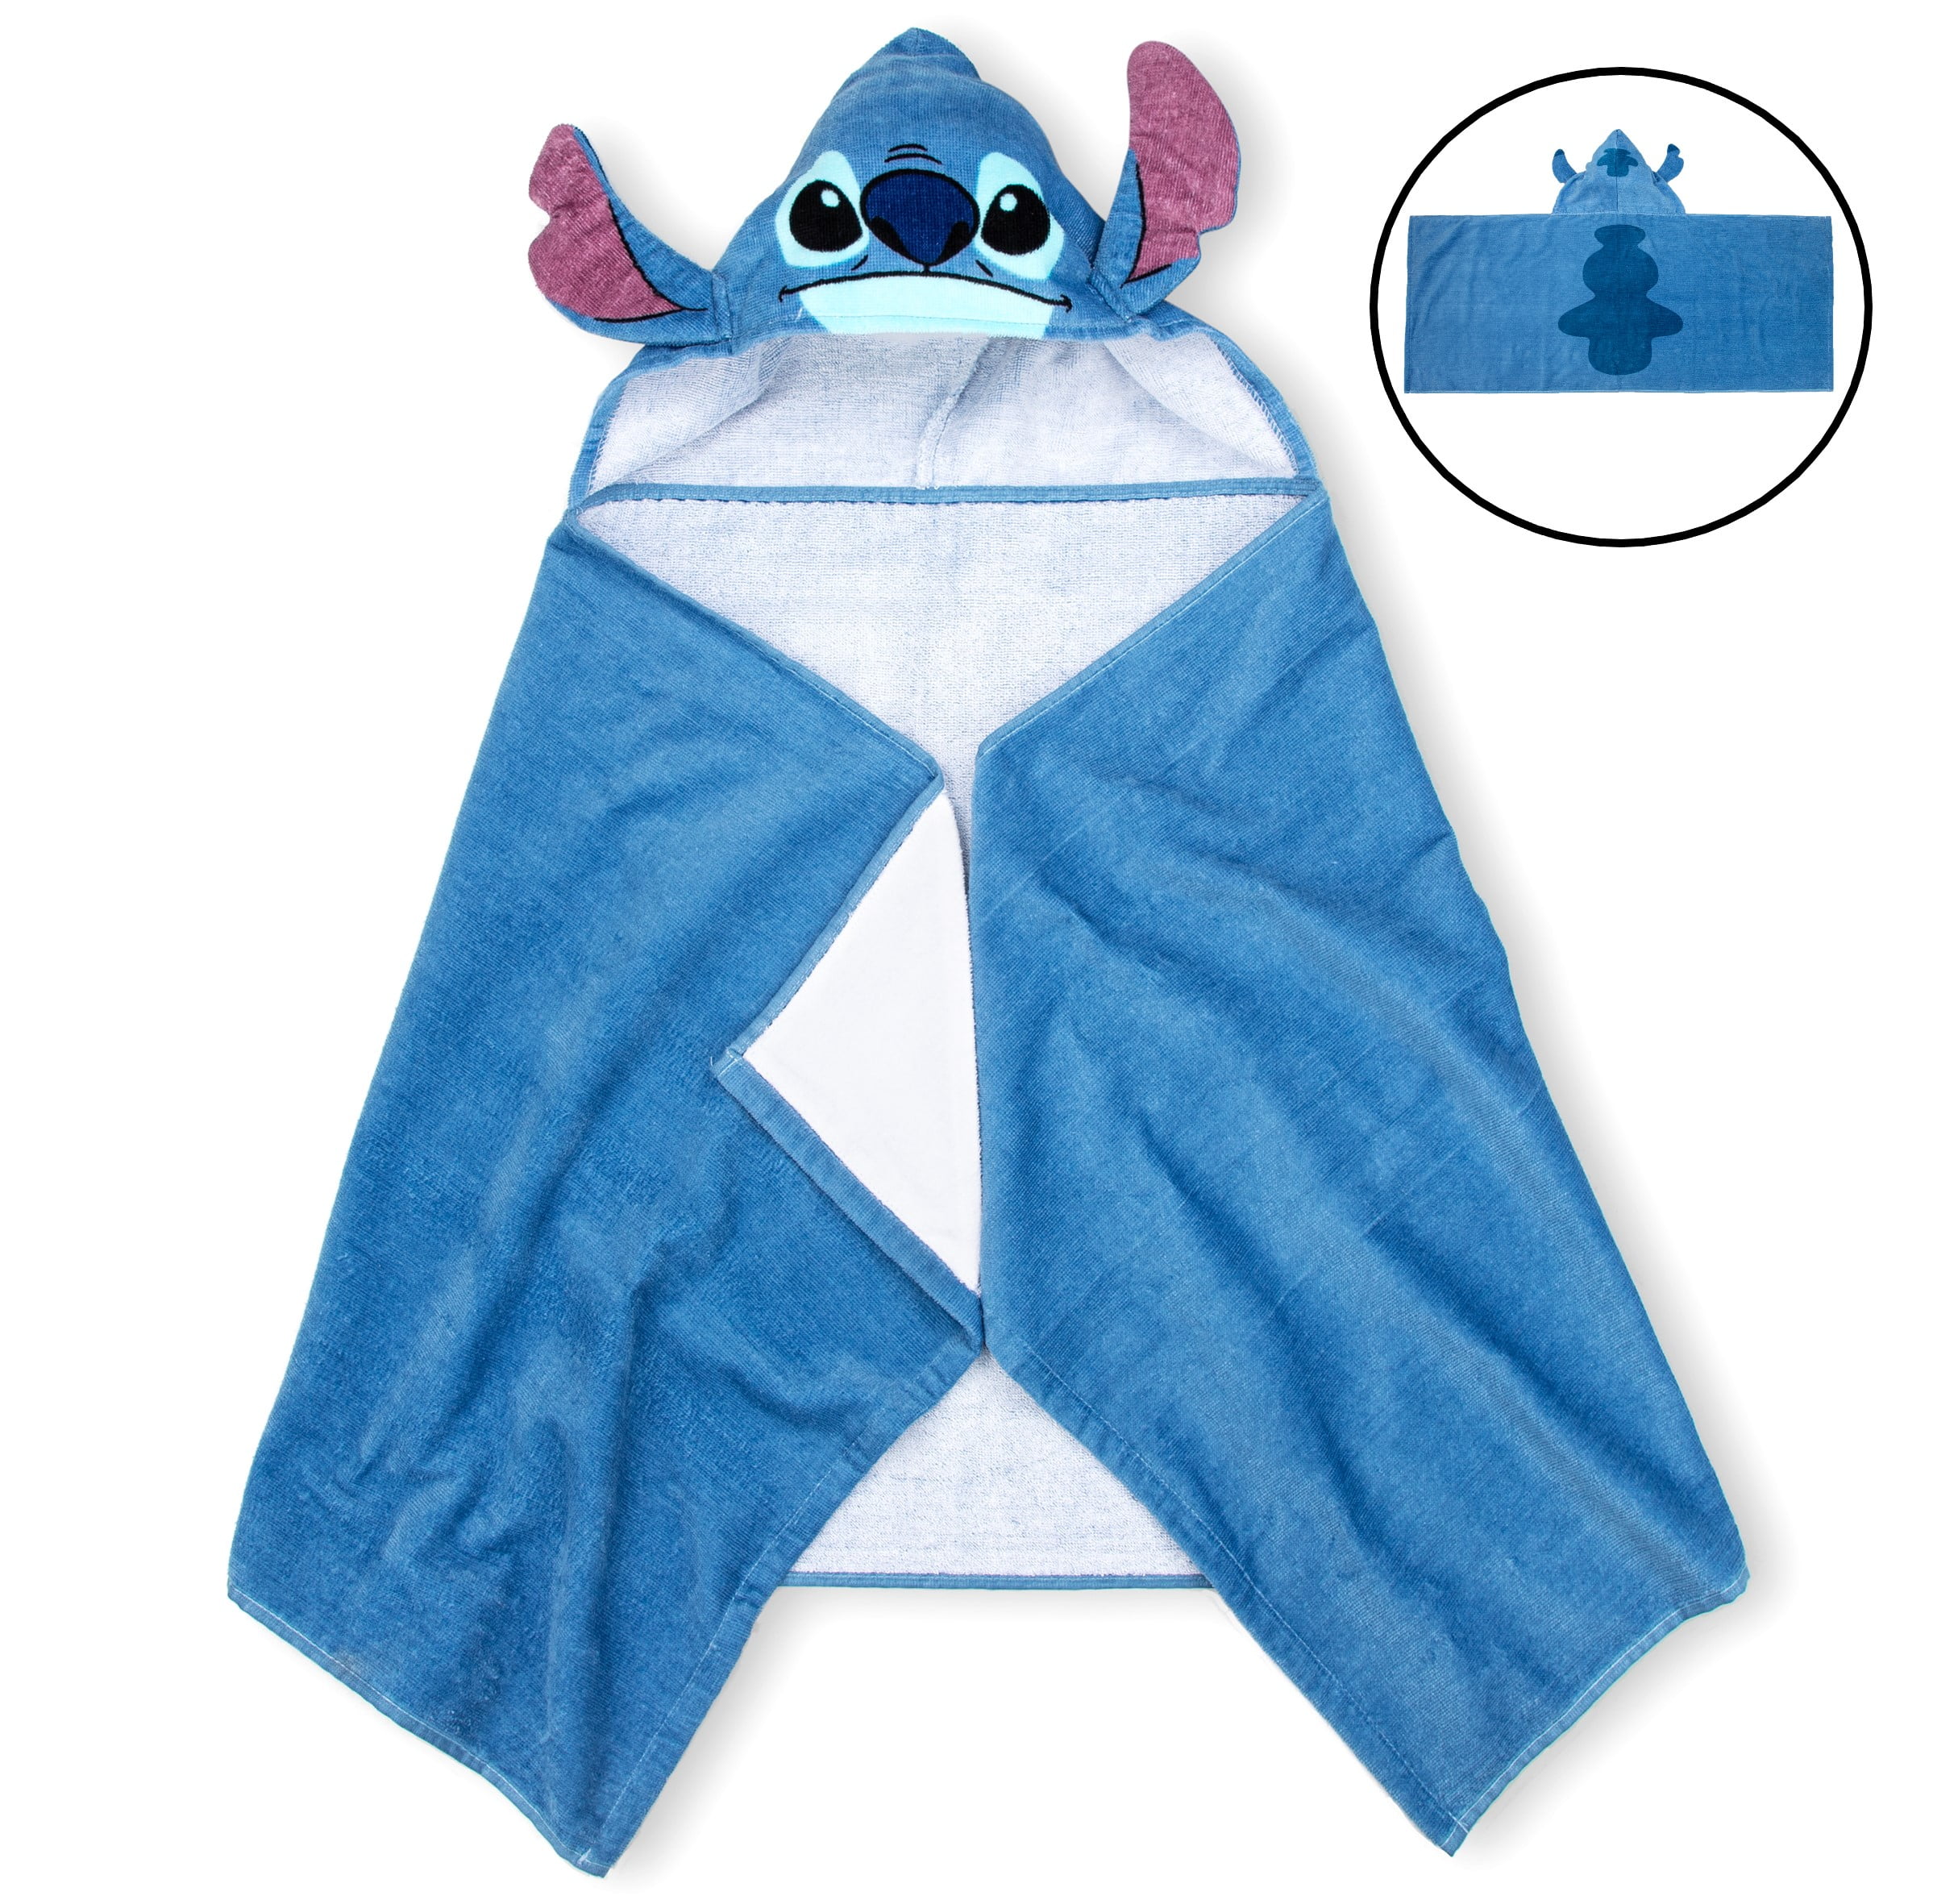 Disney Frozen II Hooded Towel 22 x 51 Inches 100% Cotton NEW 